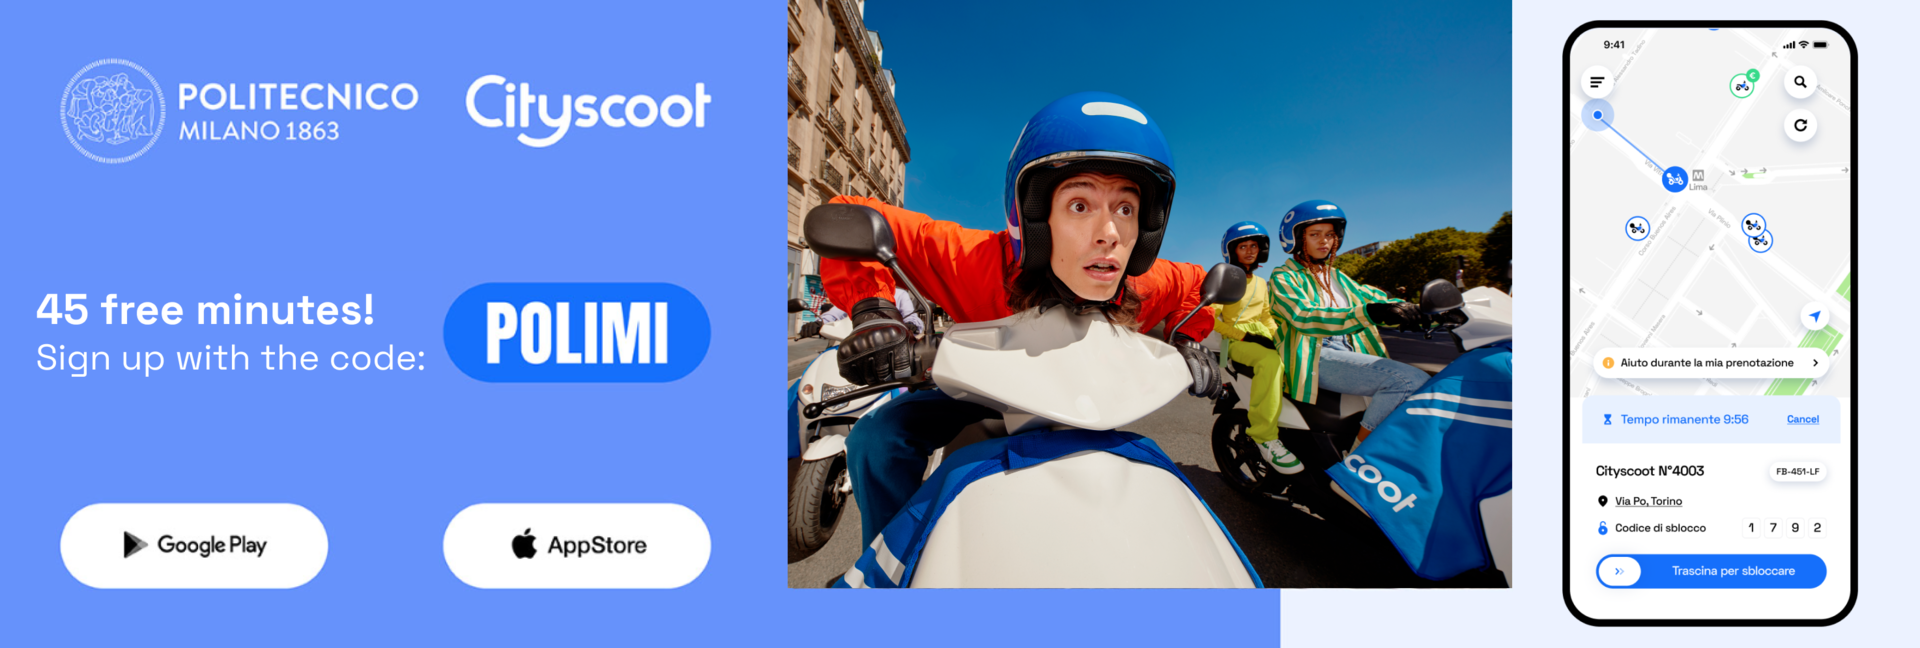 Cityscoot: 45 free minutes! Sign up with the code: POLIMI